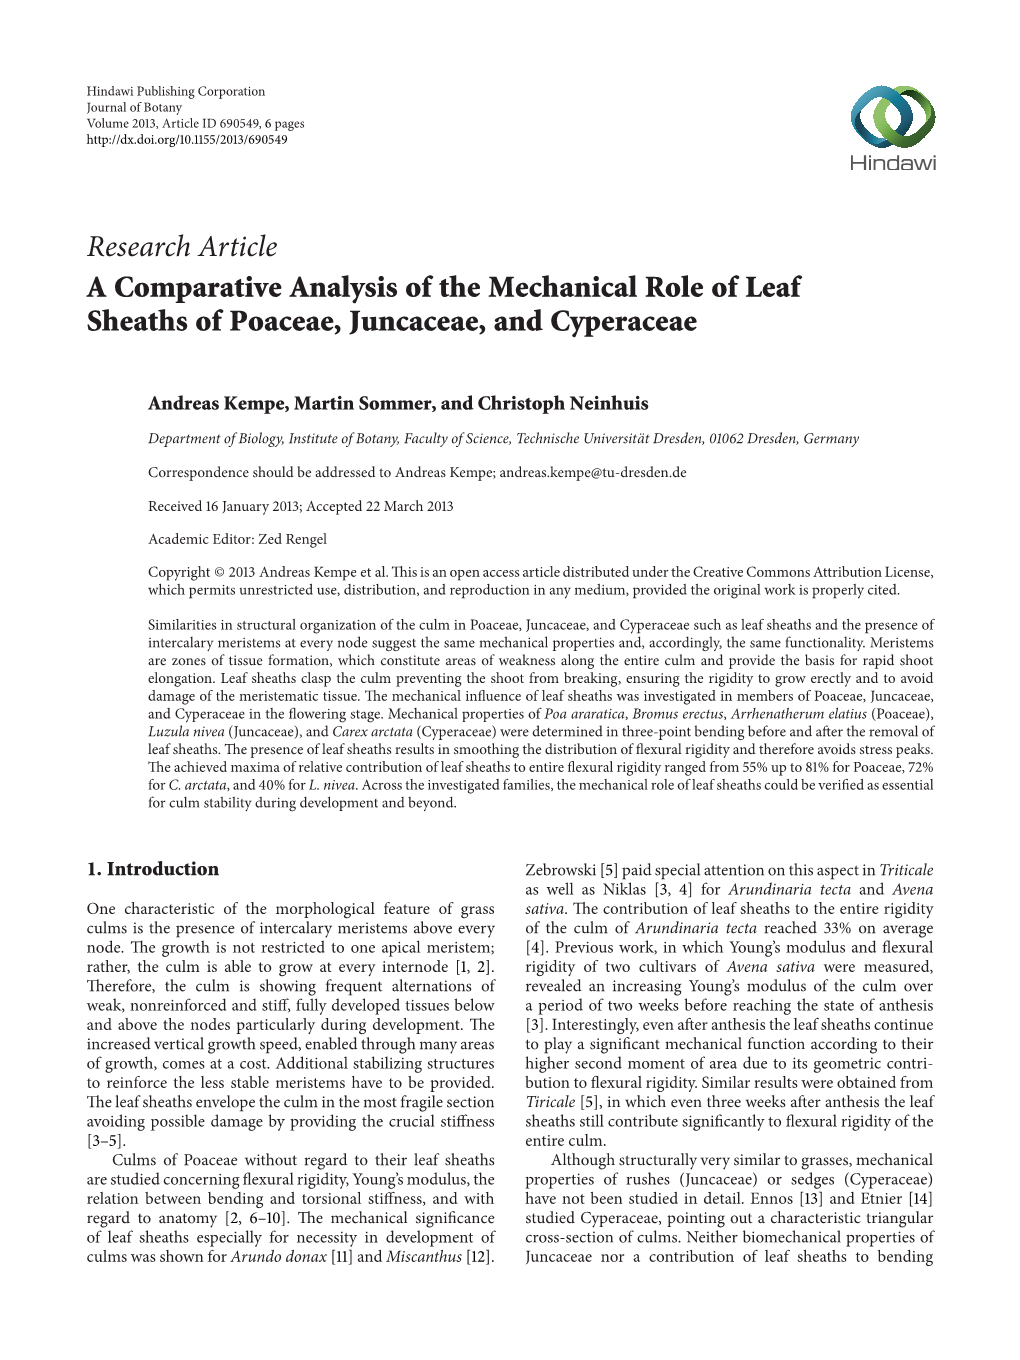 A Comparative Analysis of the Mechanical Role of Leaf Sheaths of Poaceae, Juncaceae, and Cyperaceae